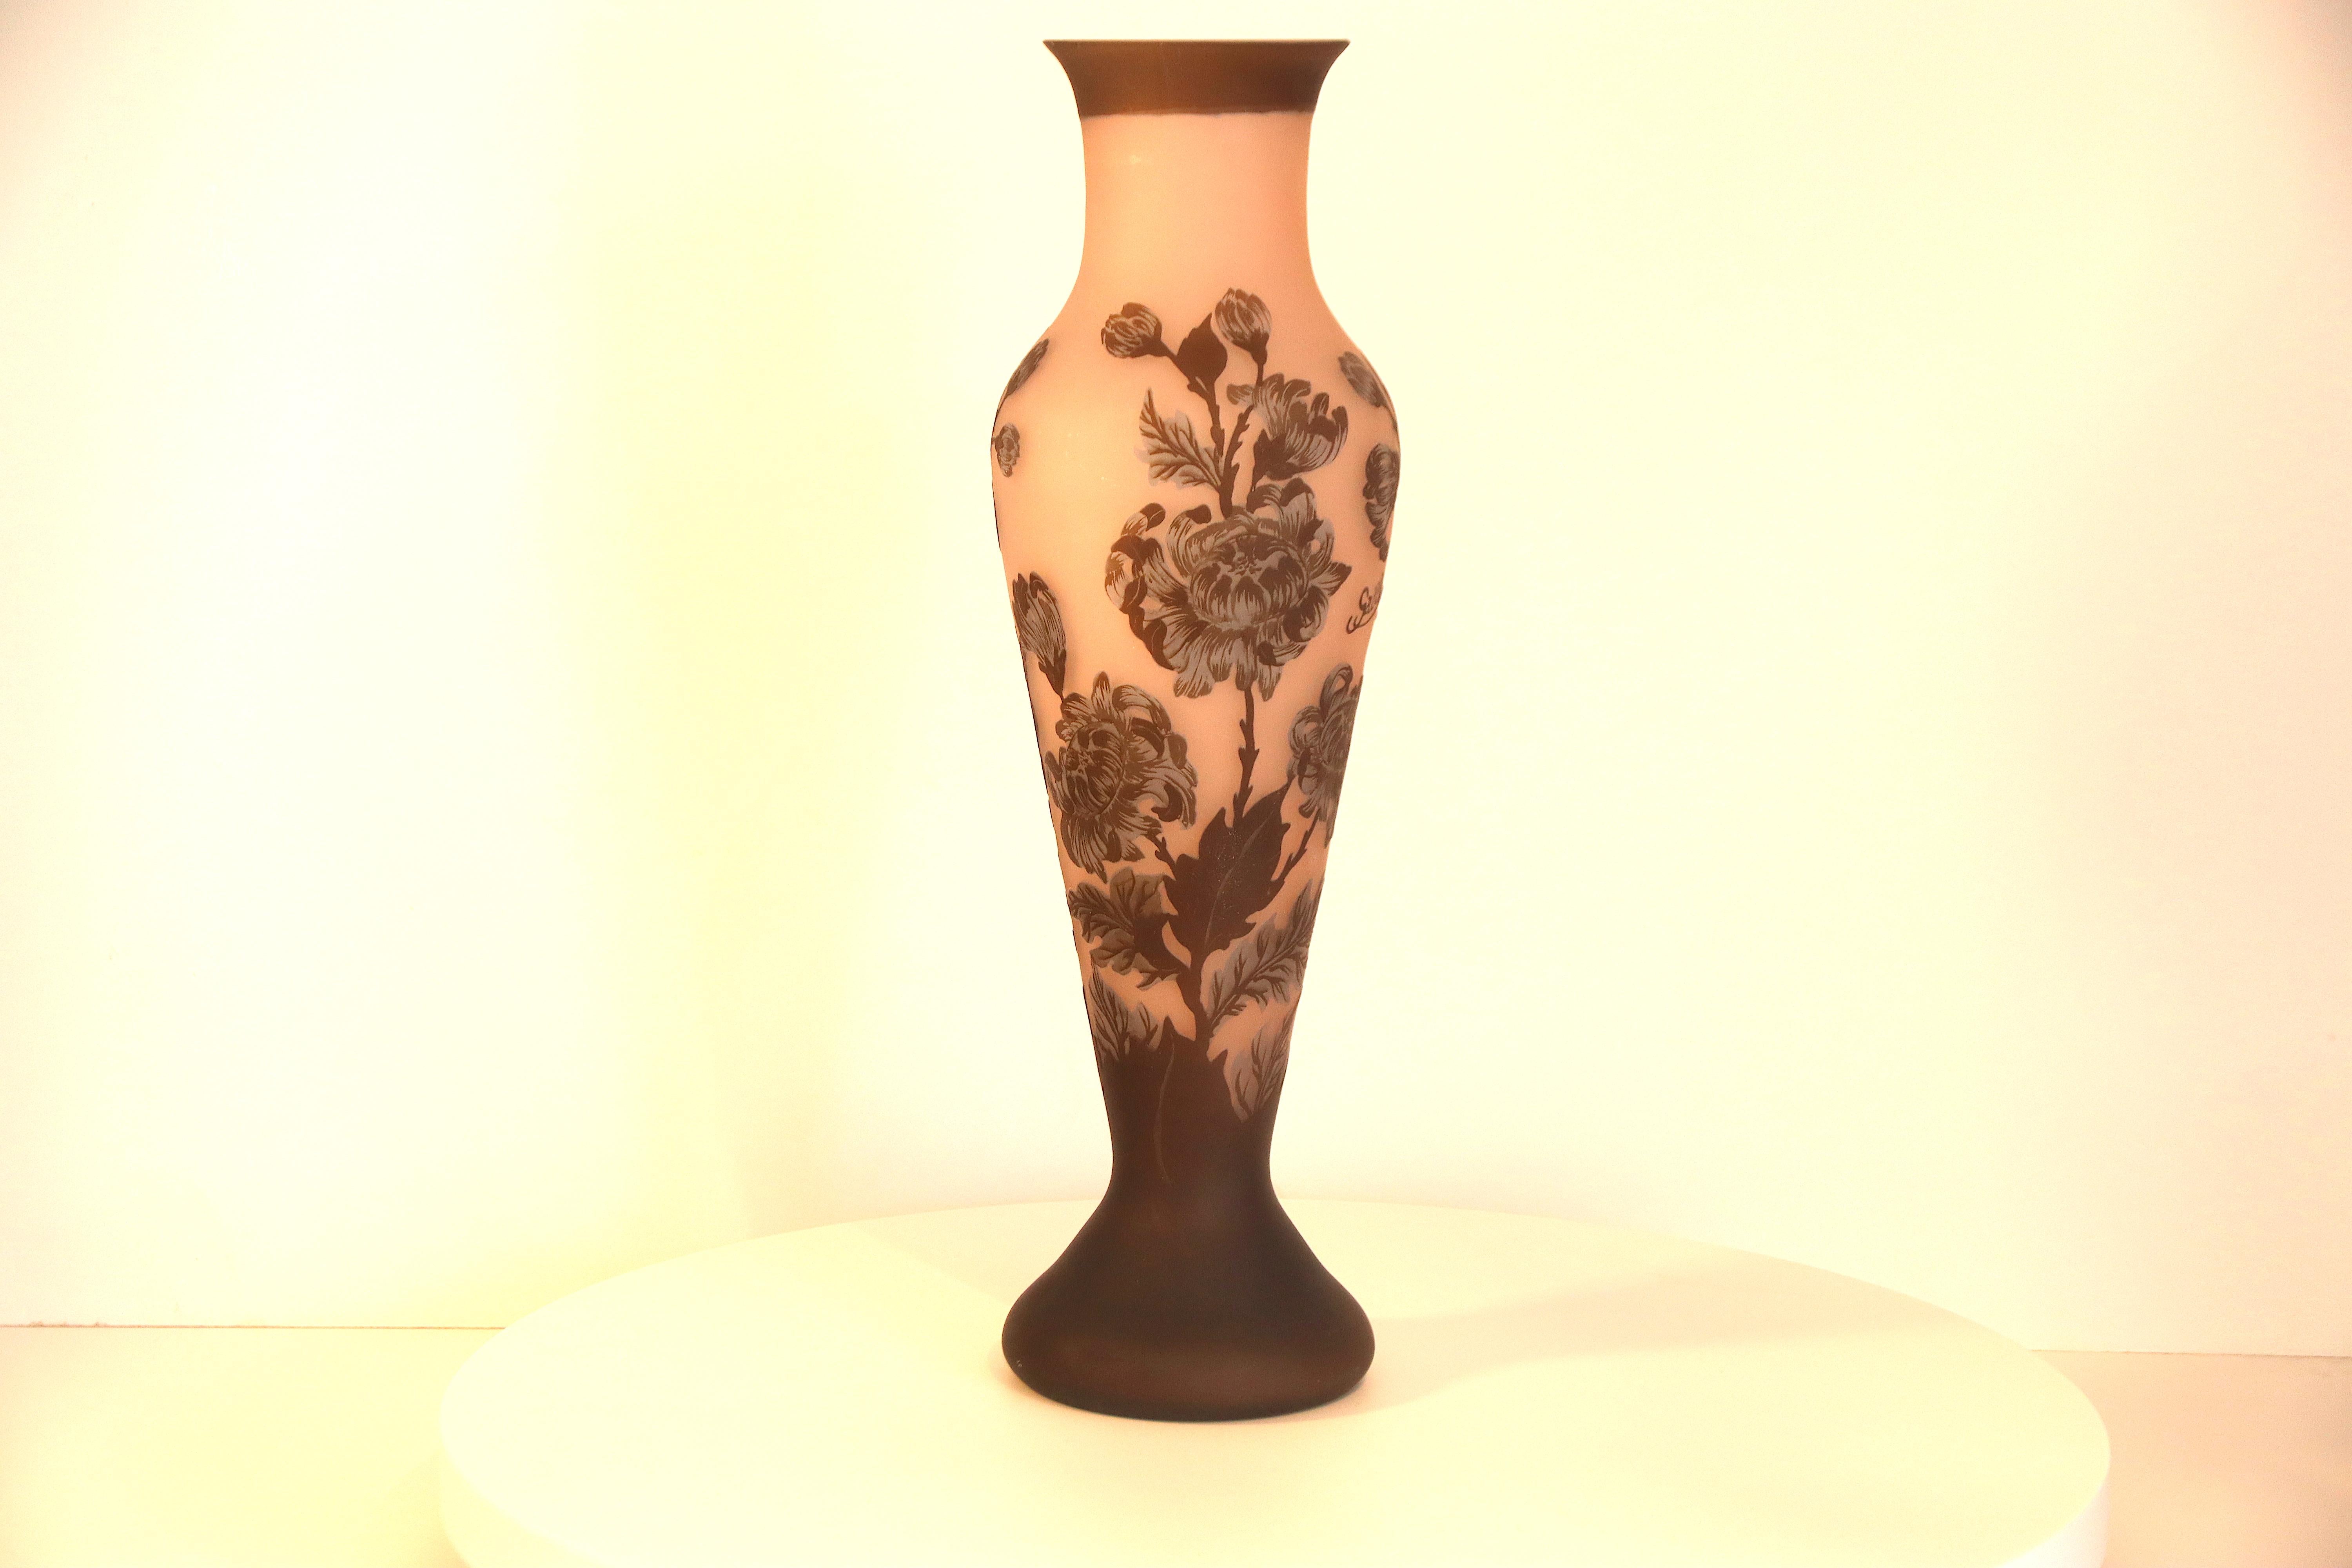 Beautiful large Art Nouveau vase signed by Emile Gallé (Gallé) featuring a floral pattern of so-called pâte-de-verre, which is an embossed layer of glass upon glass (or glass-paste); also called 